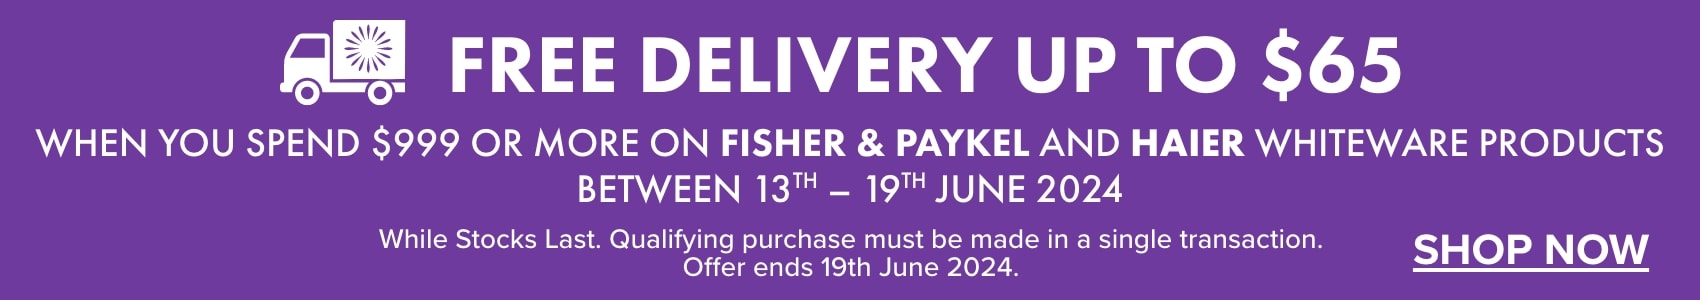 FREE DELIVERY up to $65 when you spend $999 or more on Fisher & Paykel and Haier whiteware products between 13th - 19th June 2024